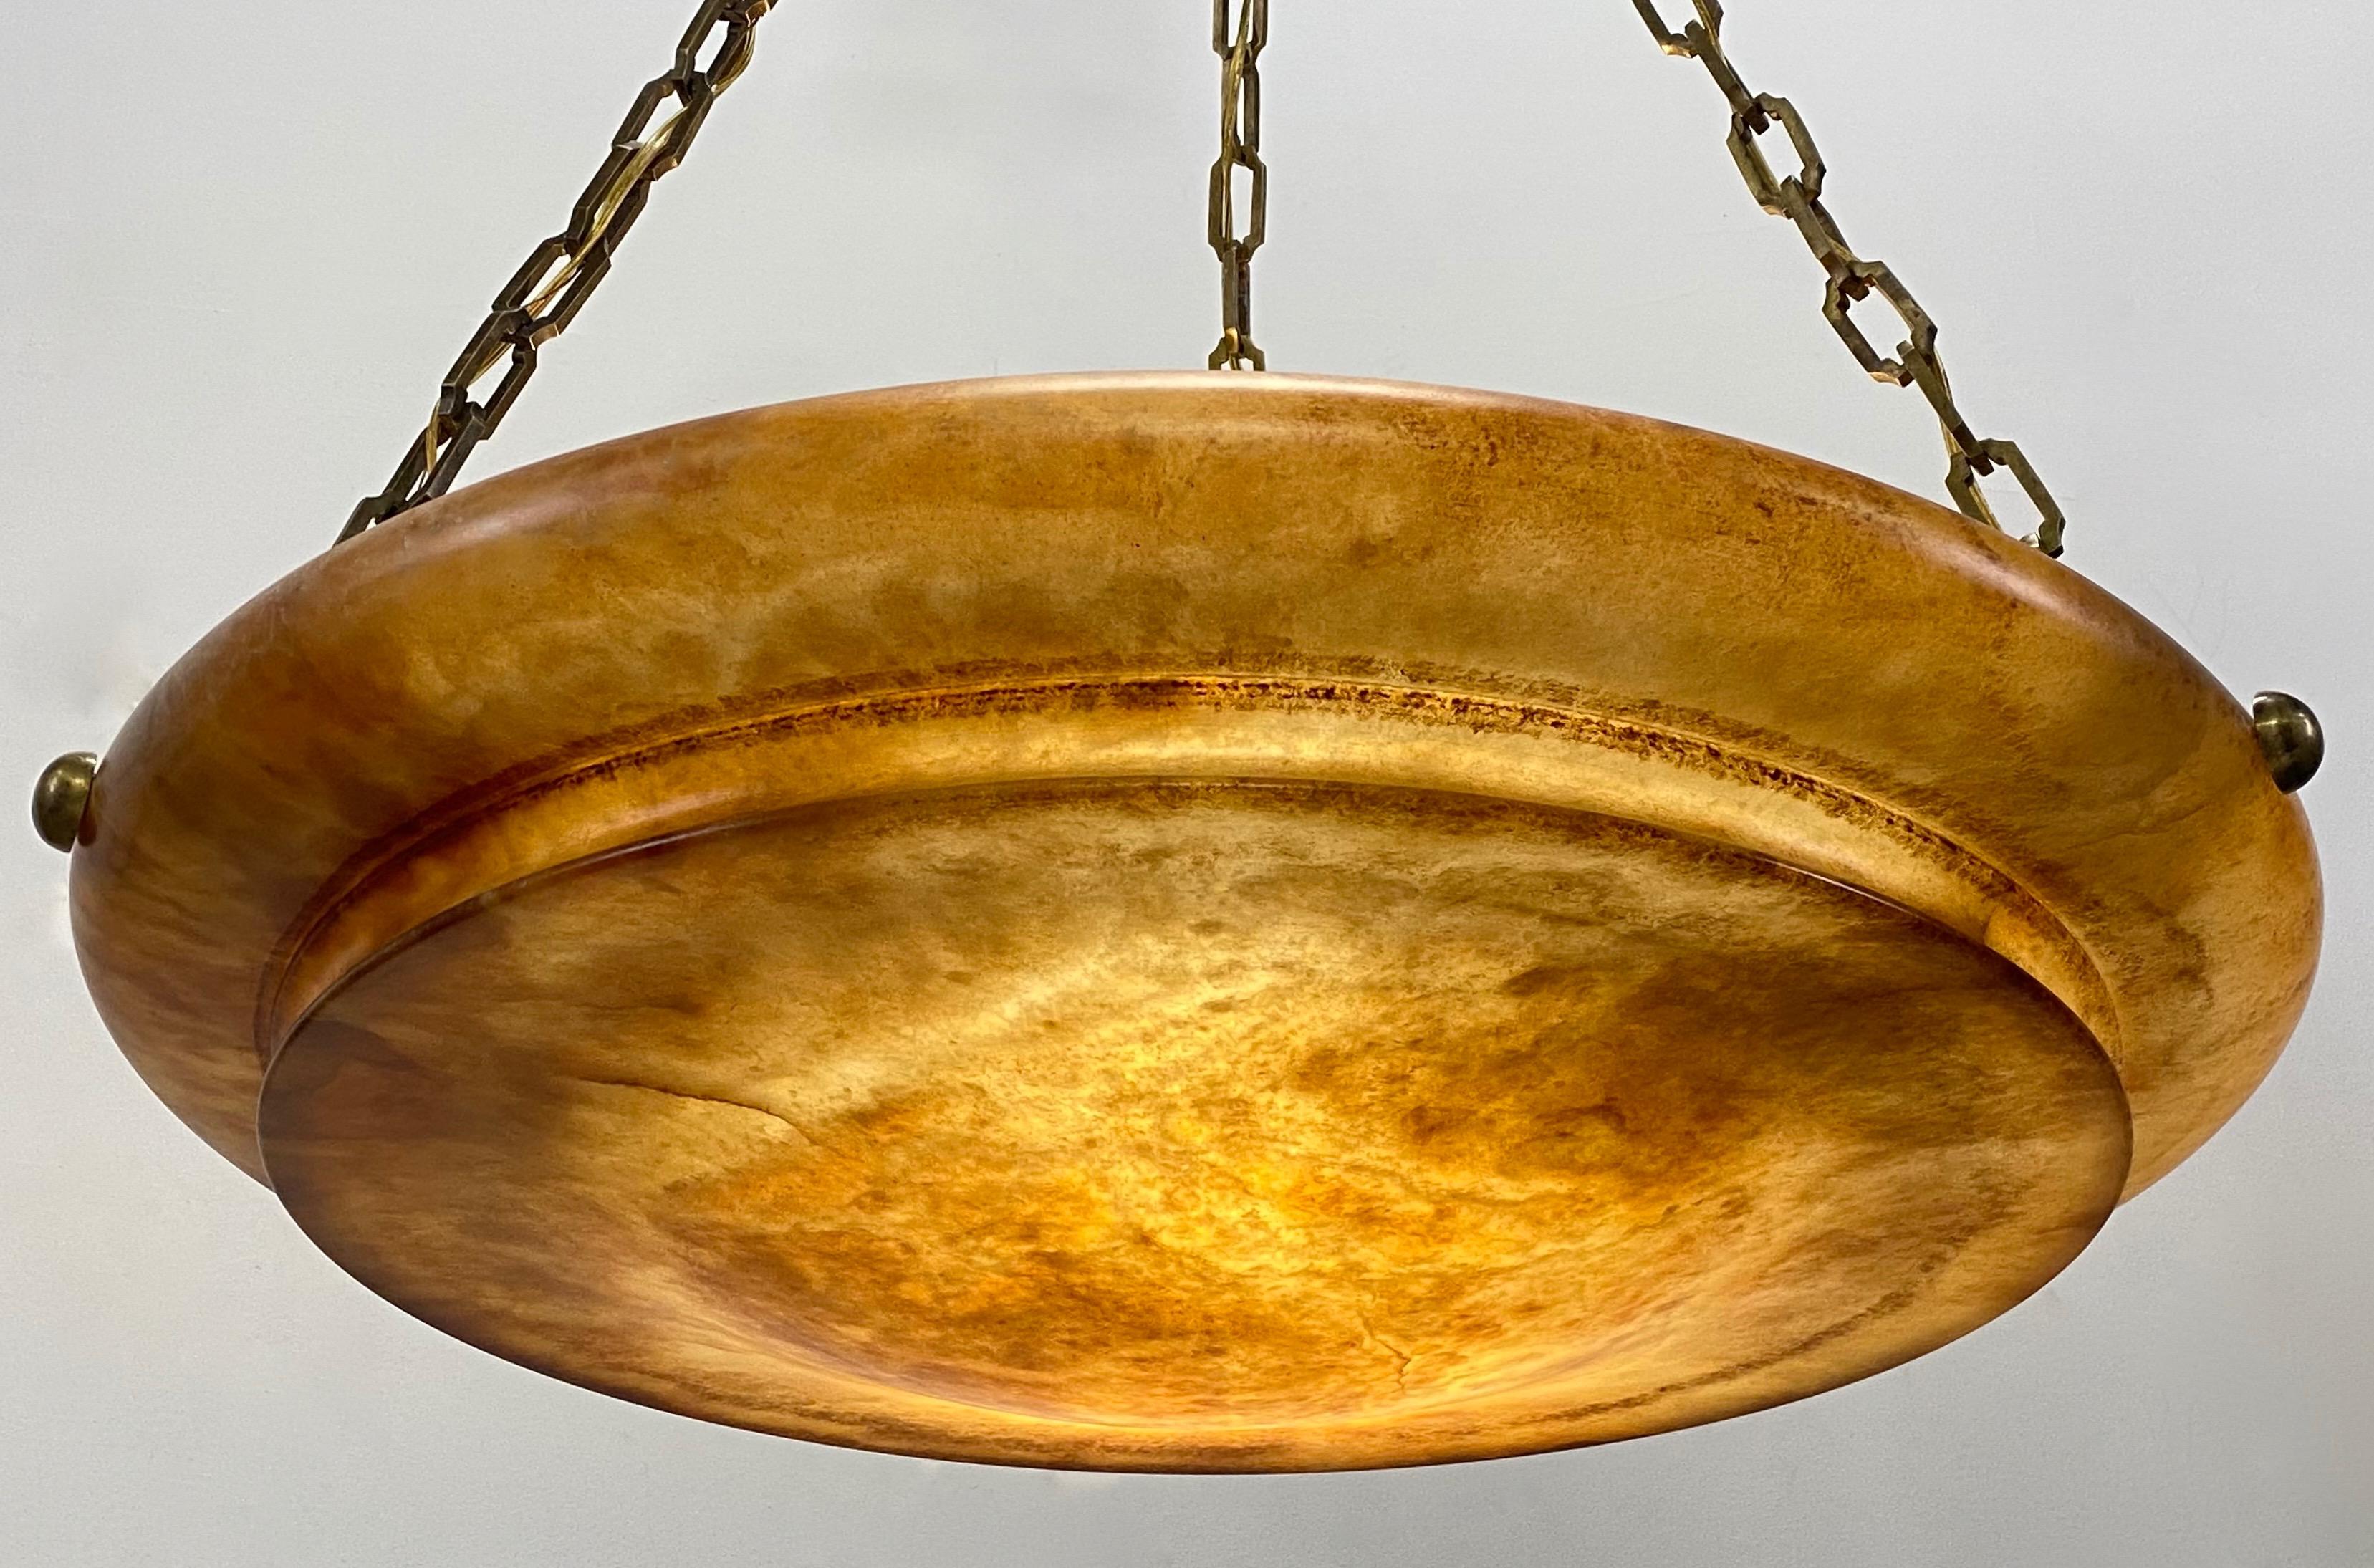 An impressive large scale amber color alabaster bowl shape light fixture with antique solid bronze square link chain and canopy.
Newly reconditioned and re-wired.

Measurement of the bowl is 7 inches high x 29 inches diameter.